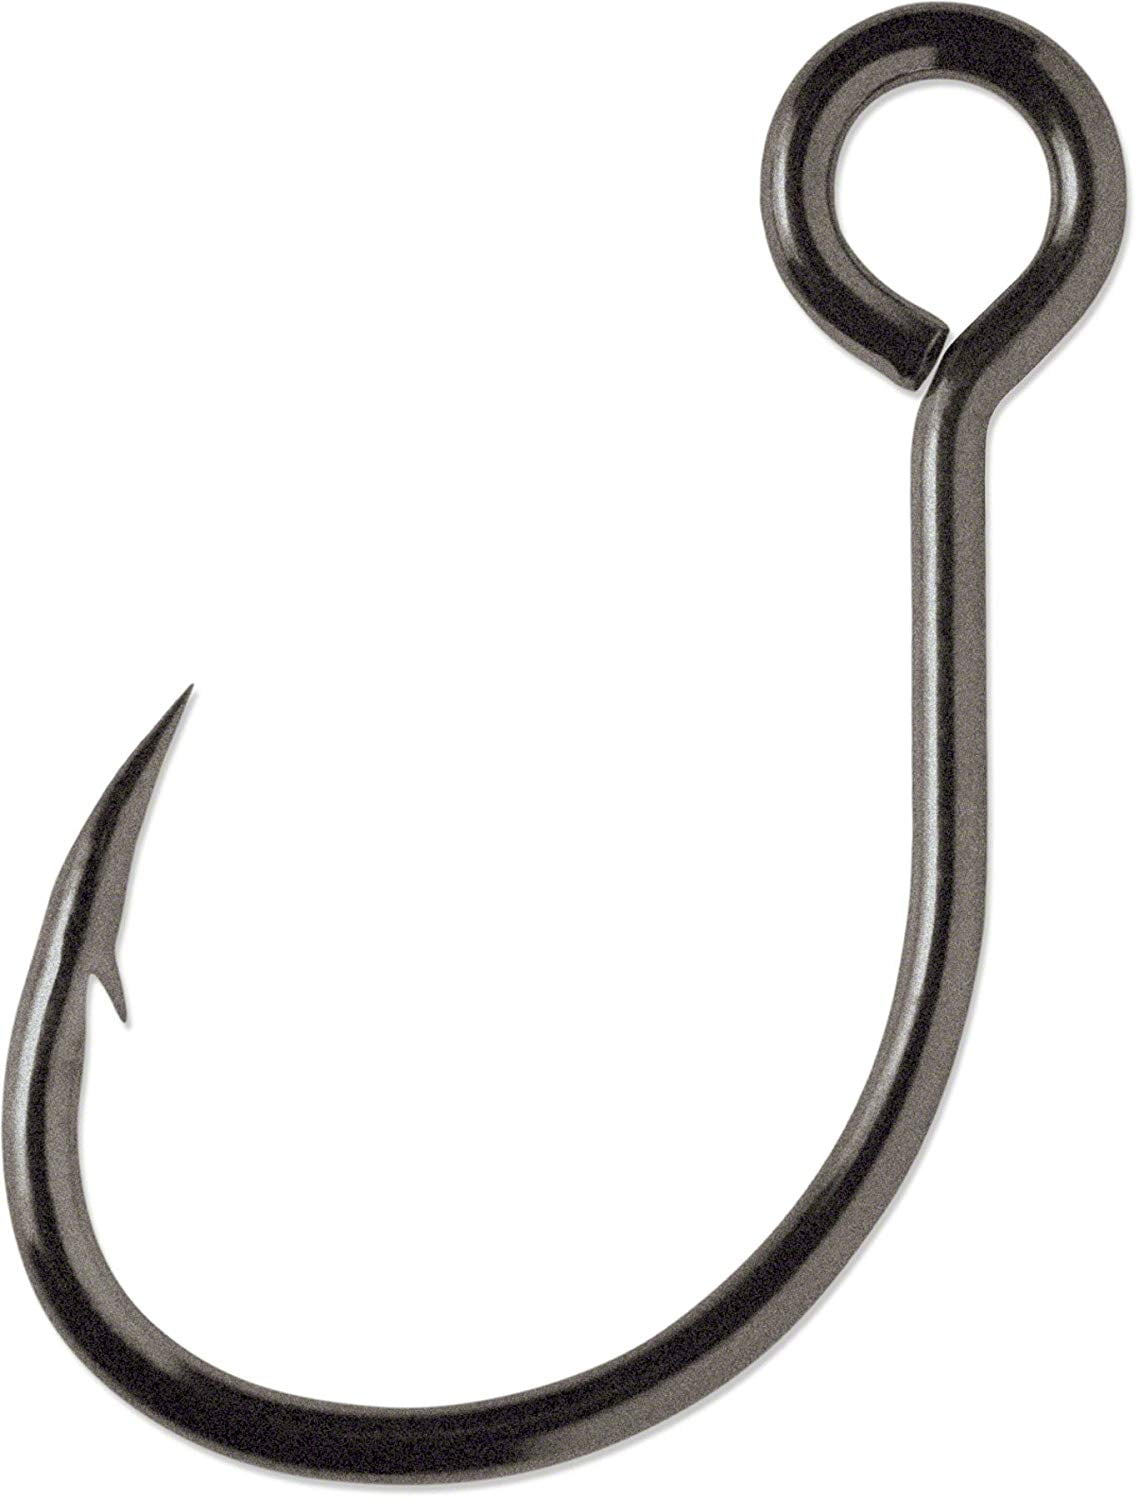 Vmc double ryder hook 9902 packs of 100 pieces size choice 